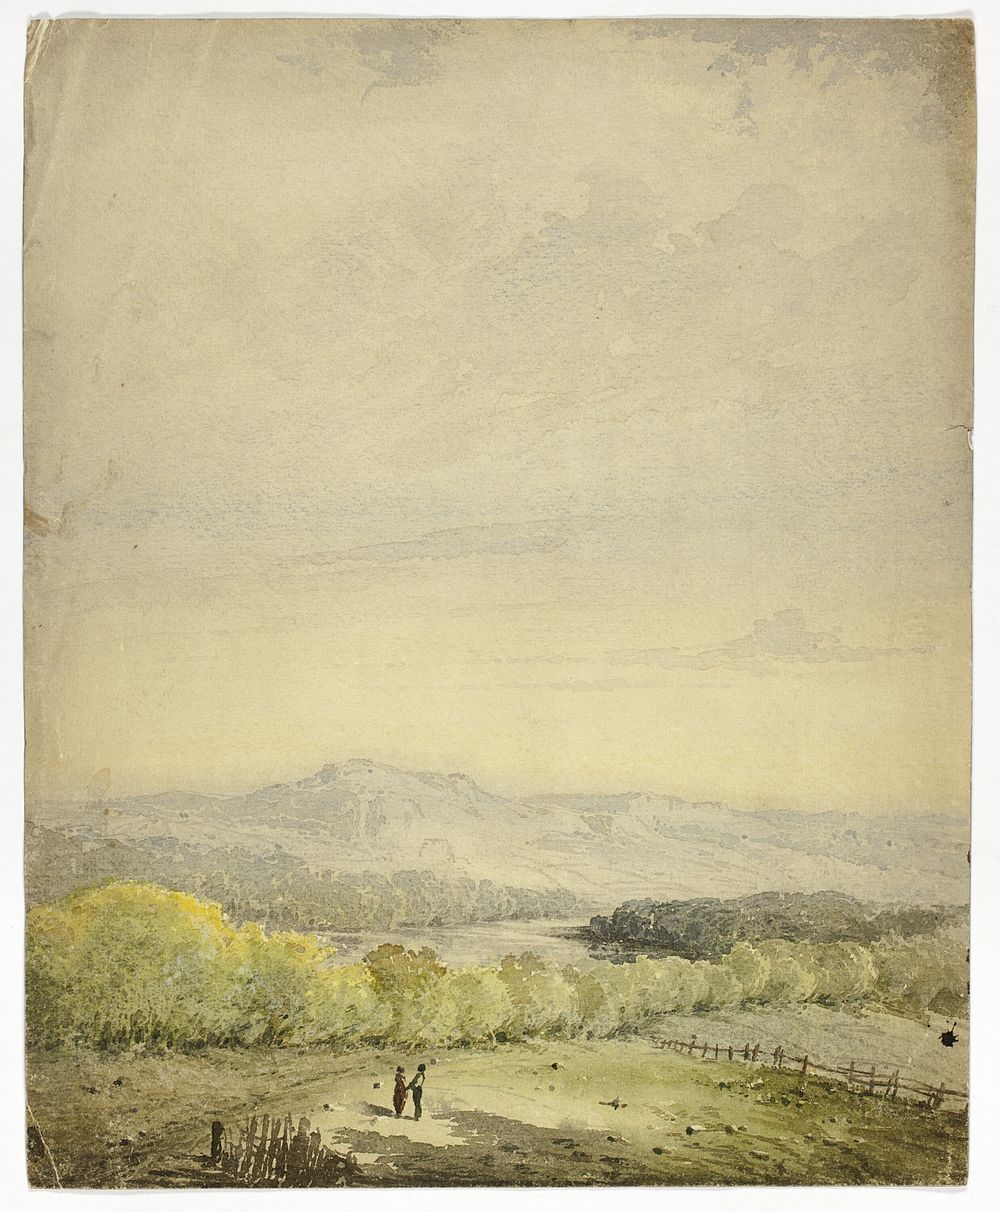 Couple Holding Hands in a Field by Unknown artist